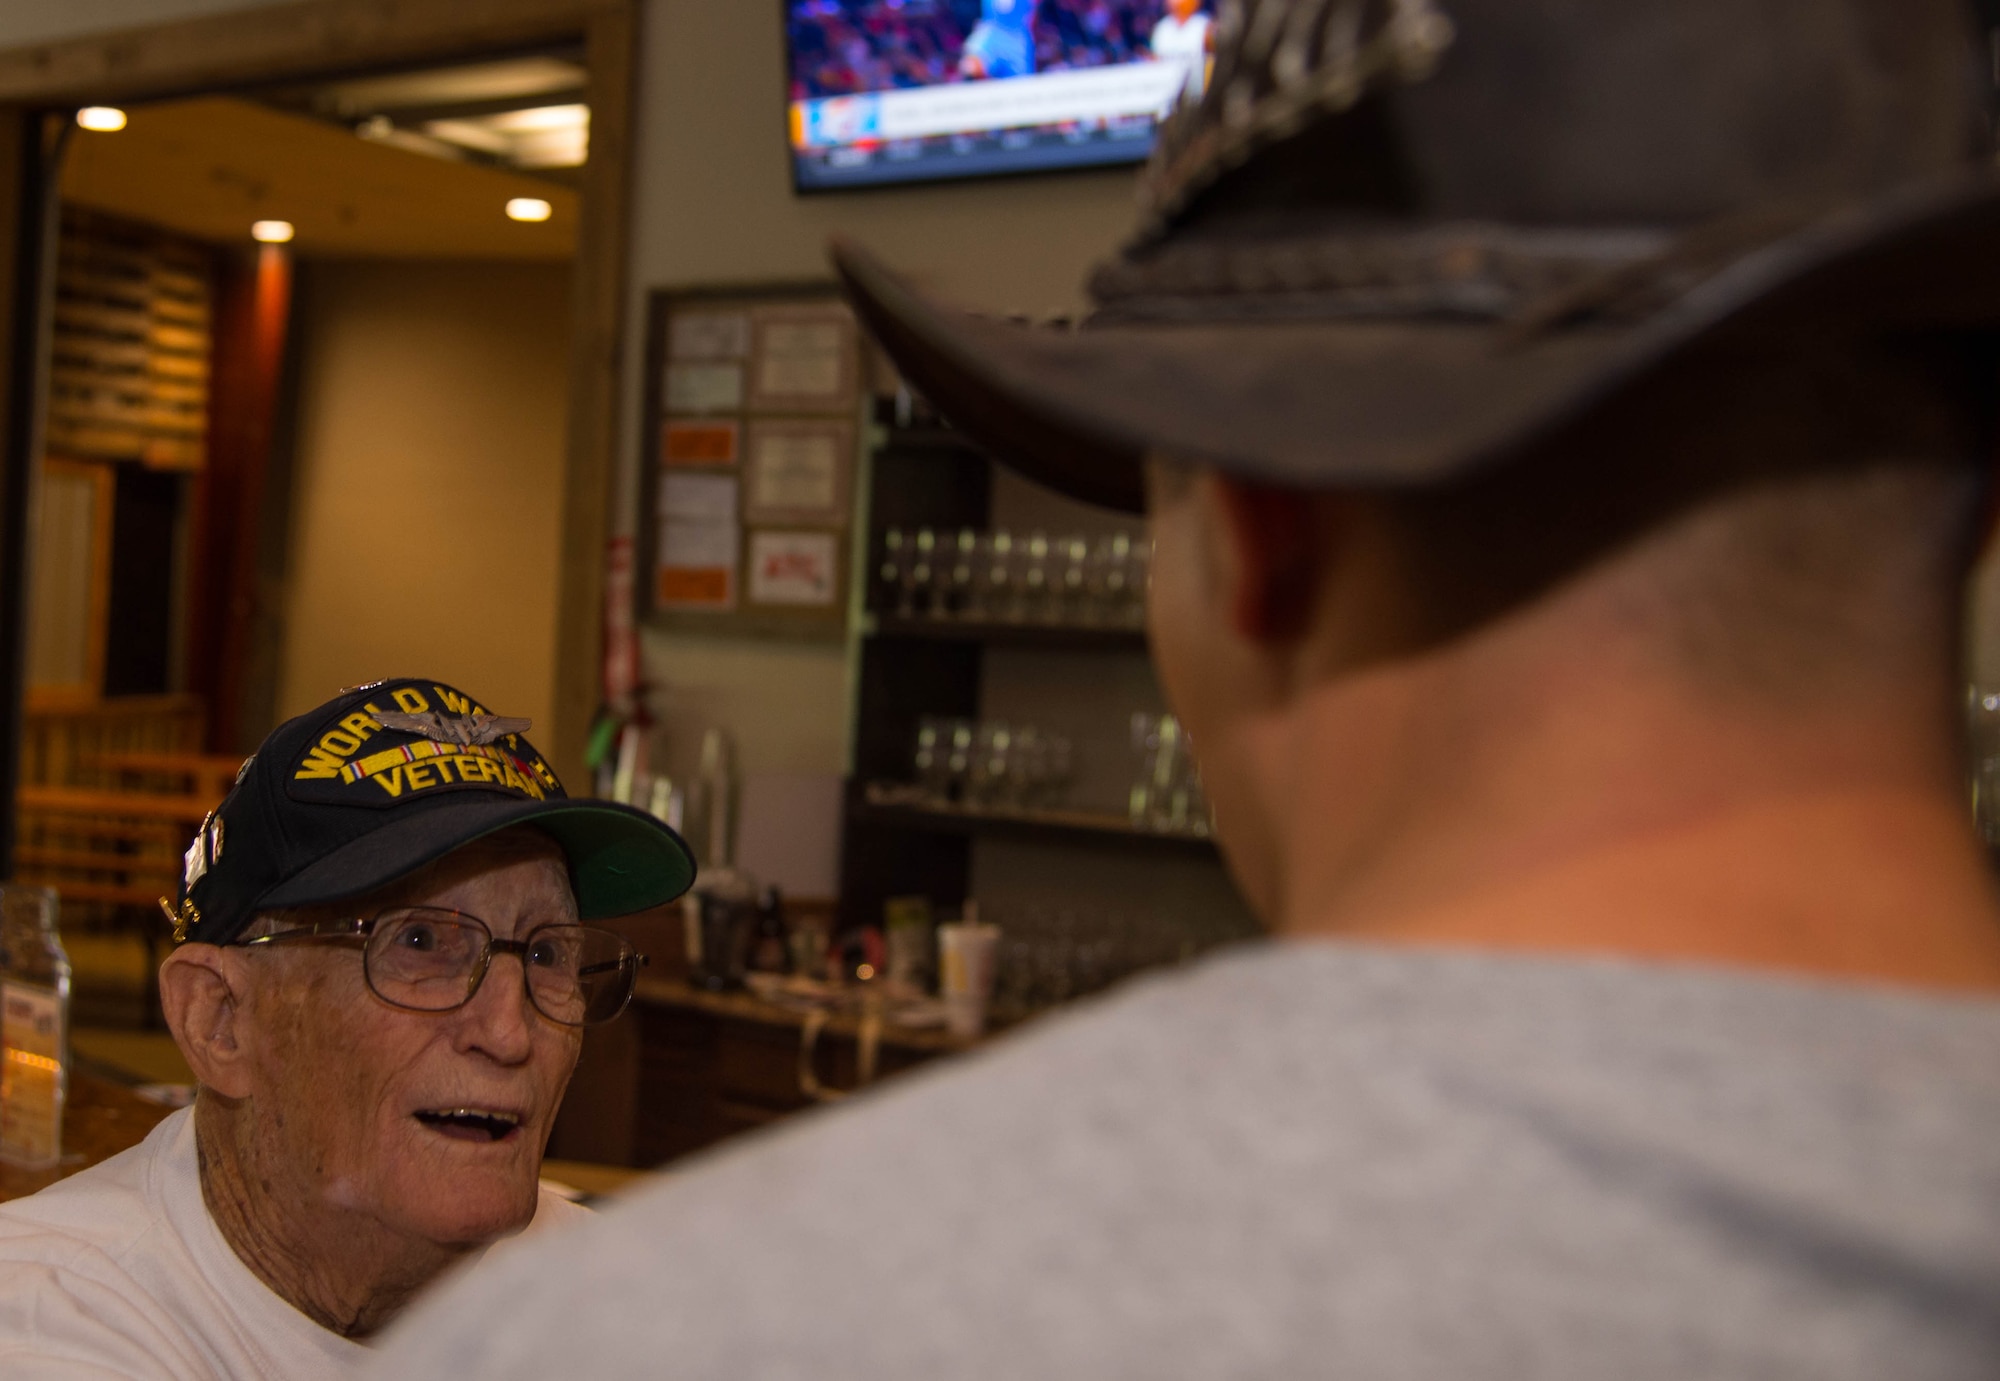 Dale Stickrath, World War II 307th Bombardment Group veteran, trades stories with another veteran at the Red River Brewing Co. Shreveport, La., March 30, 2017. In 1942, 27 B-24 Liberators from the 307th Bombardment Group took part in one of the longest mass-raids of that era which earned them the name “The Long Rangers.” The now, 307th Bomb Wing celebrated their 75th Anniversary with alumni from wars such as World War II, Korean War, Vietnam and Operation Inherent Resolve. (U.S. Air Force photo by Staff Sgt. Jason McCasland/Released)